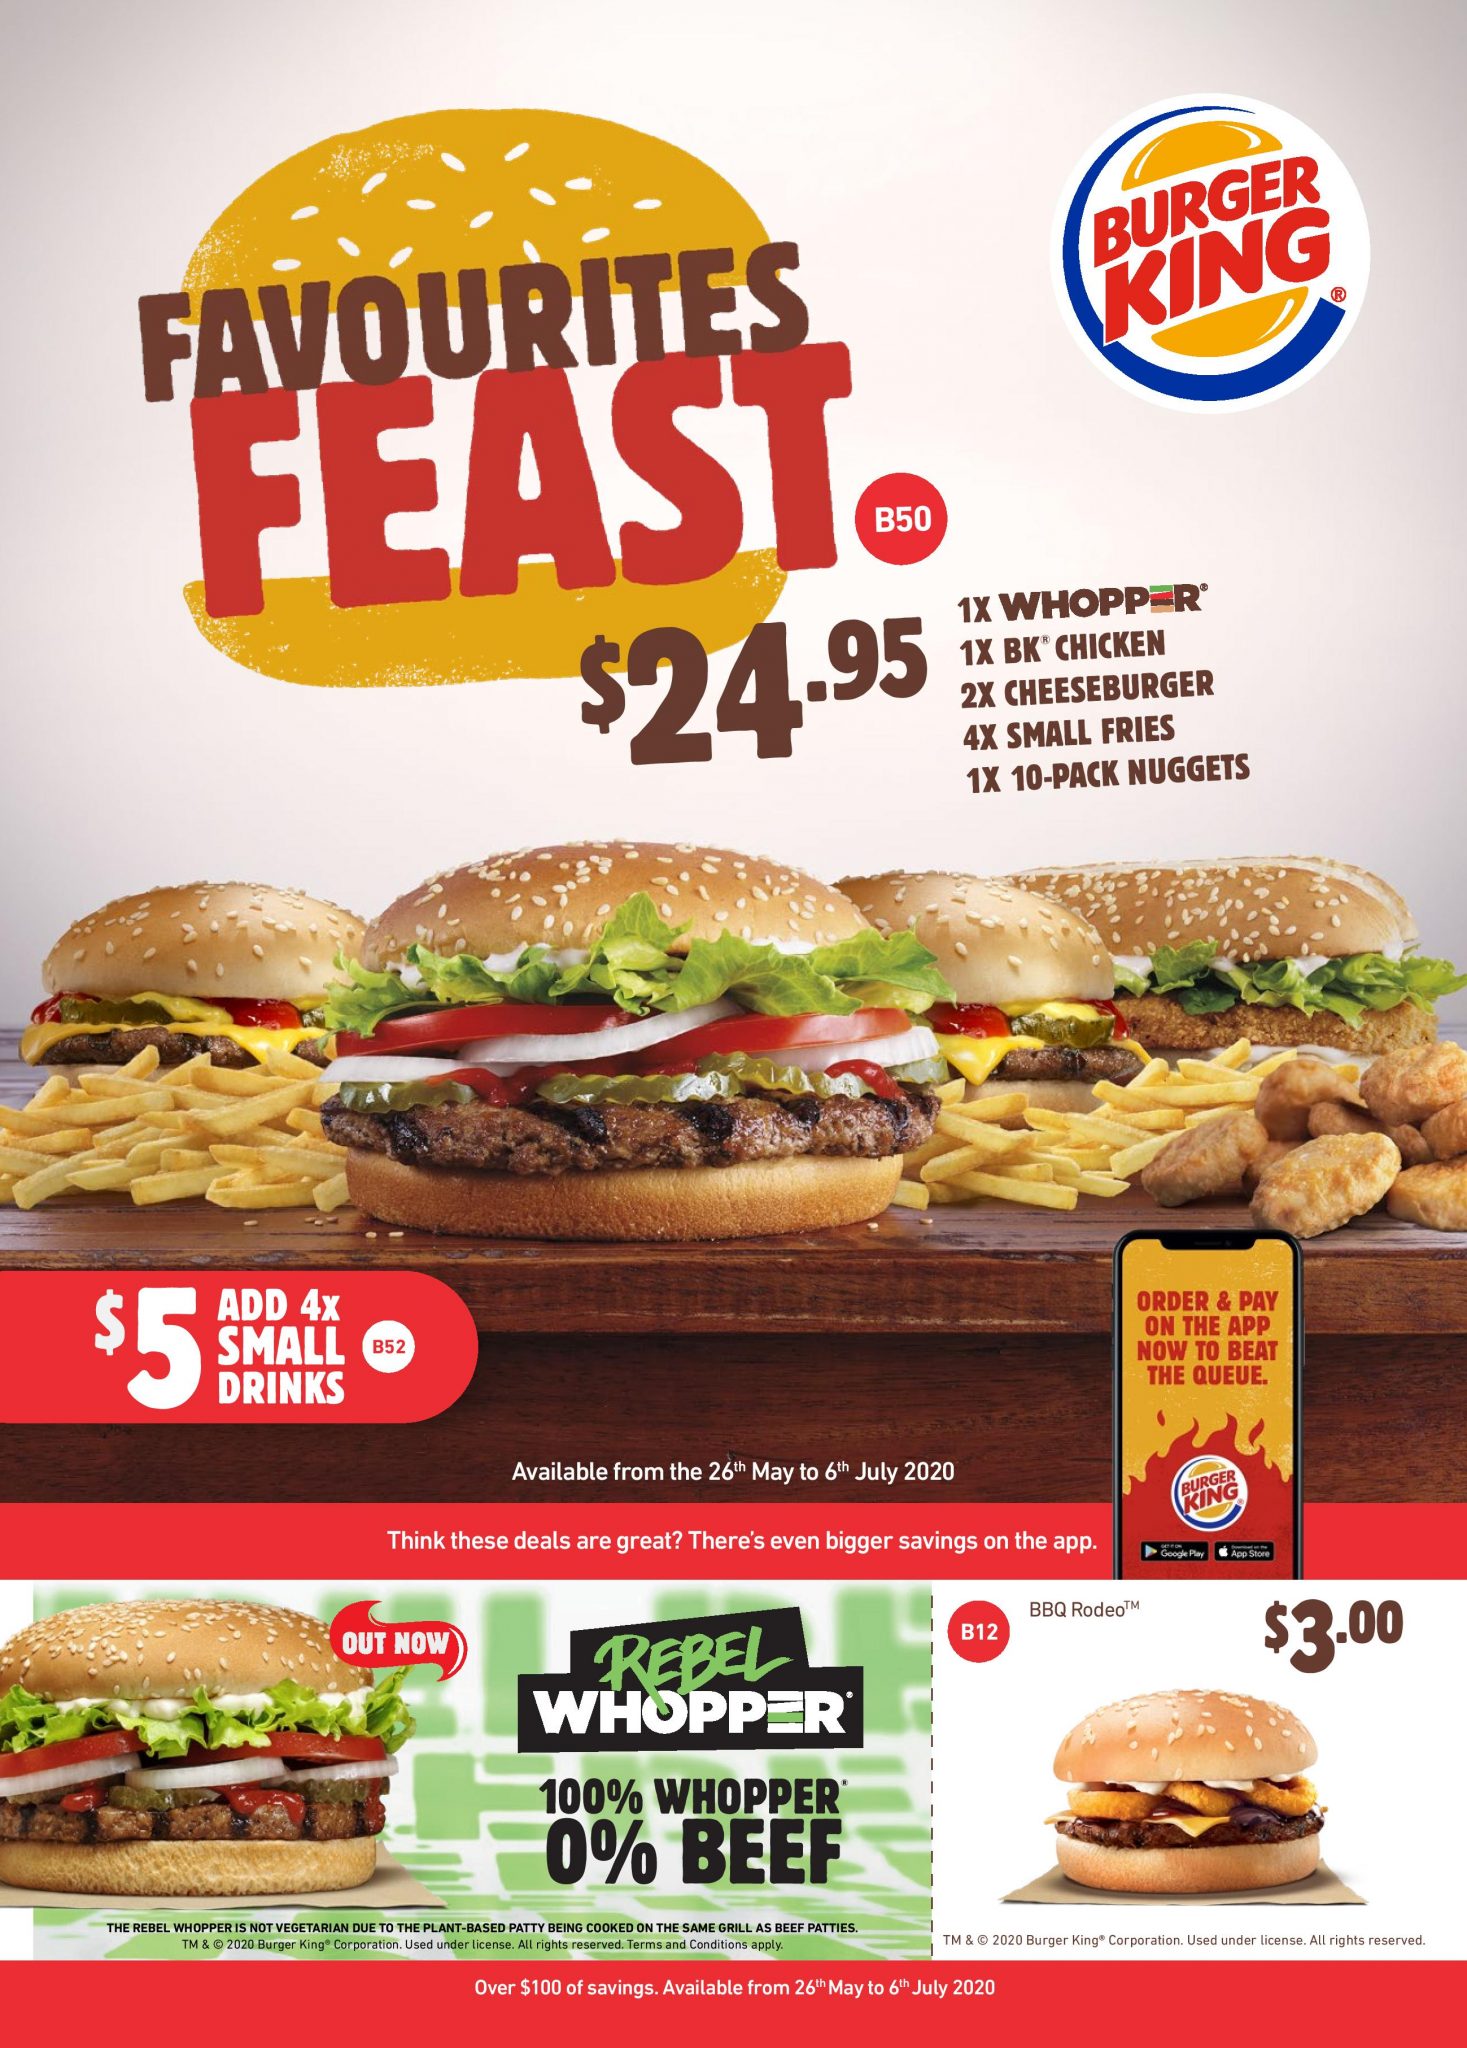 DEAL Burger King Coupons valid until 6 July 2020 Latest BK Coupons